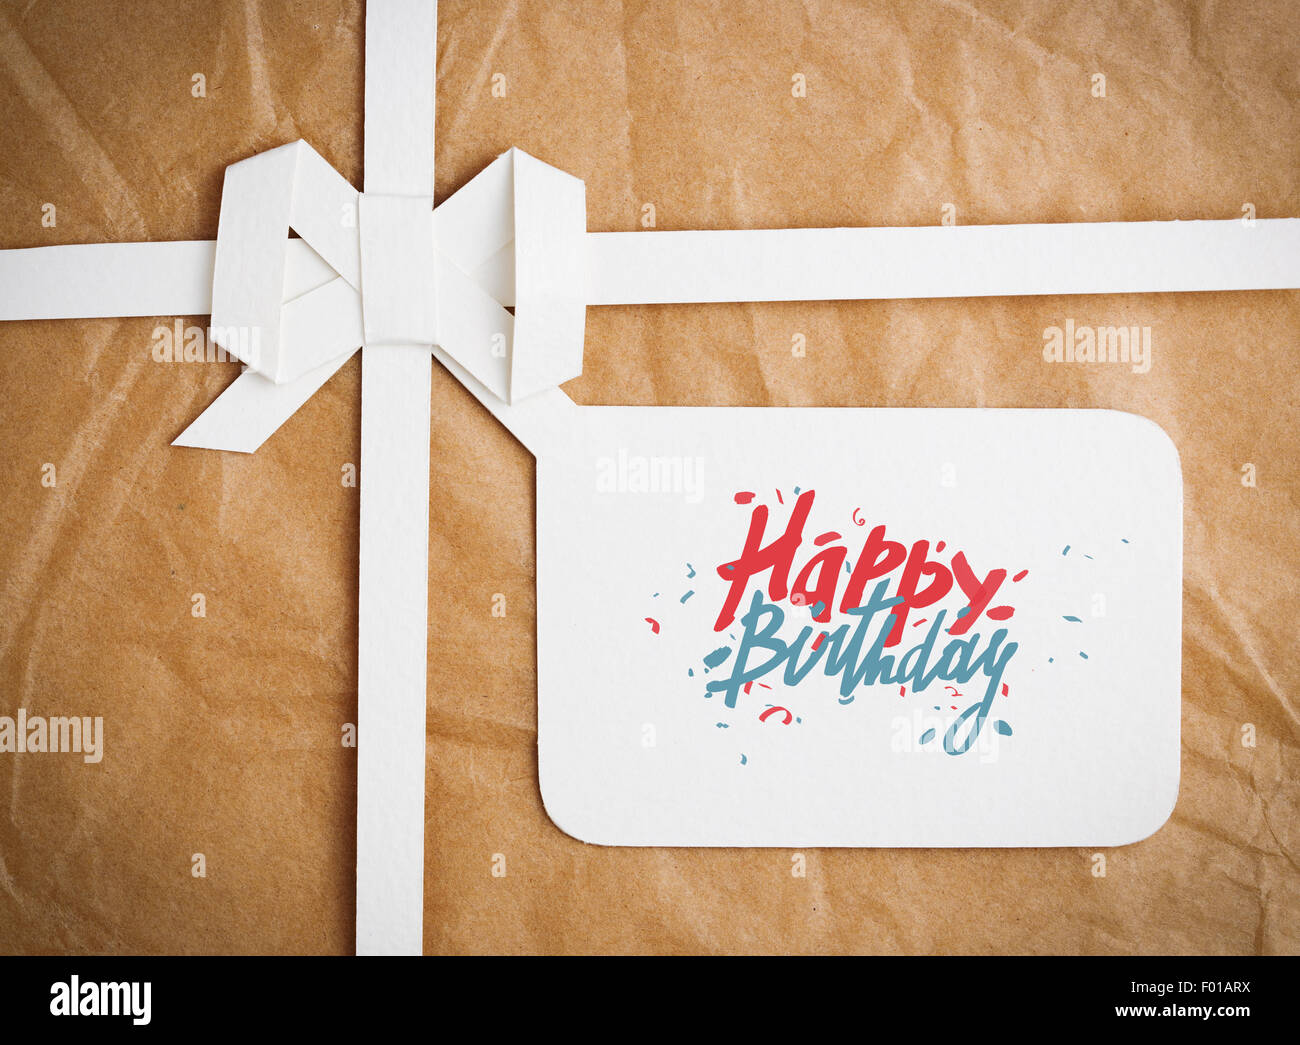 Gift box with Happy Birthday on gift tag Stock Photo